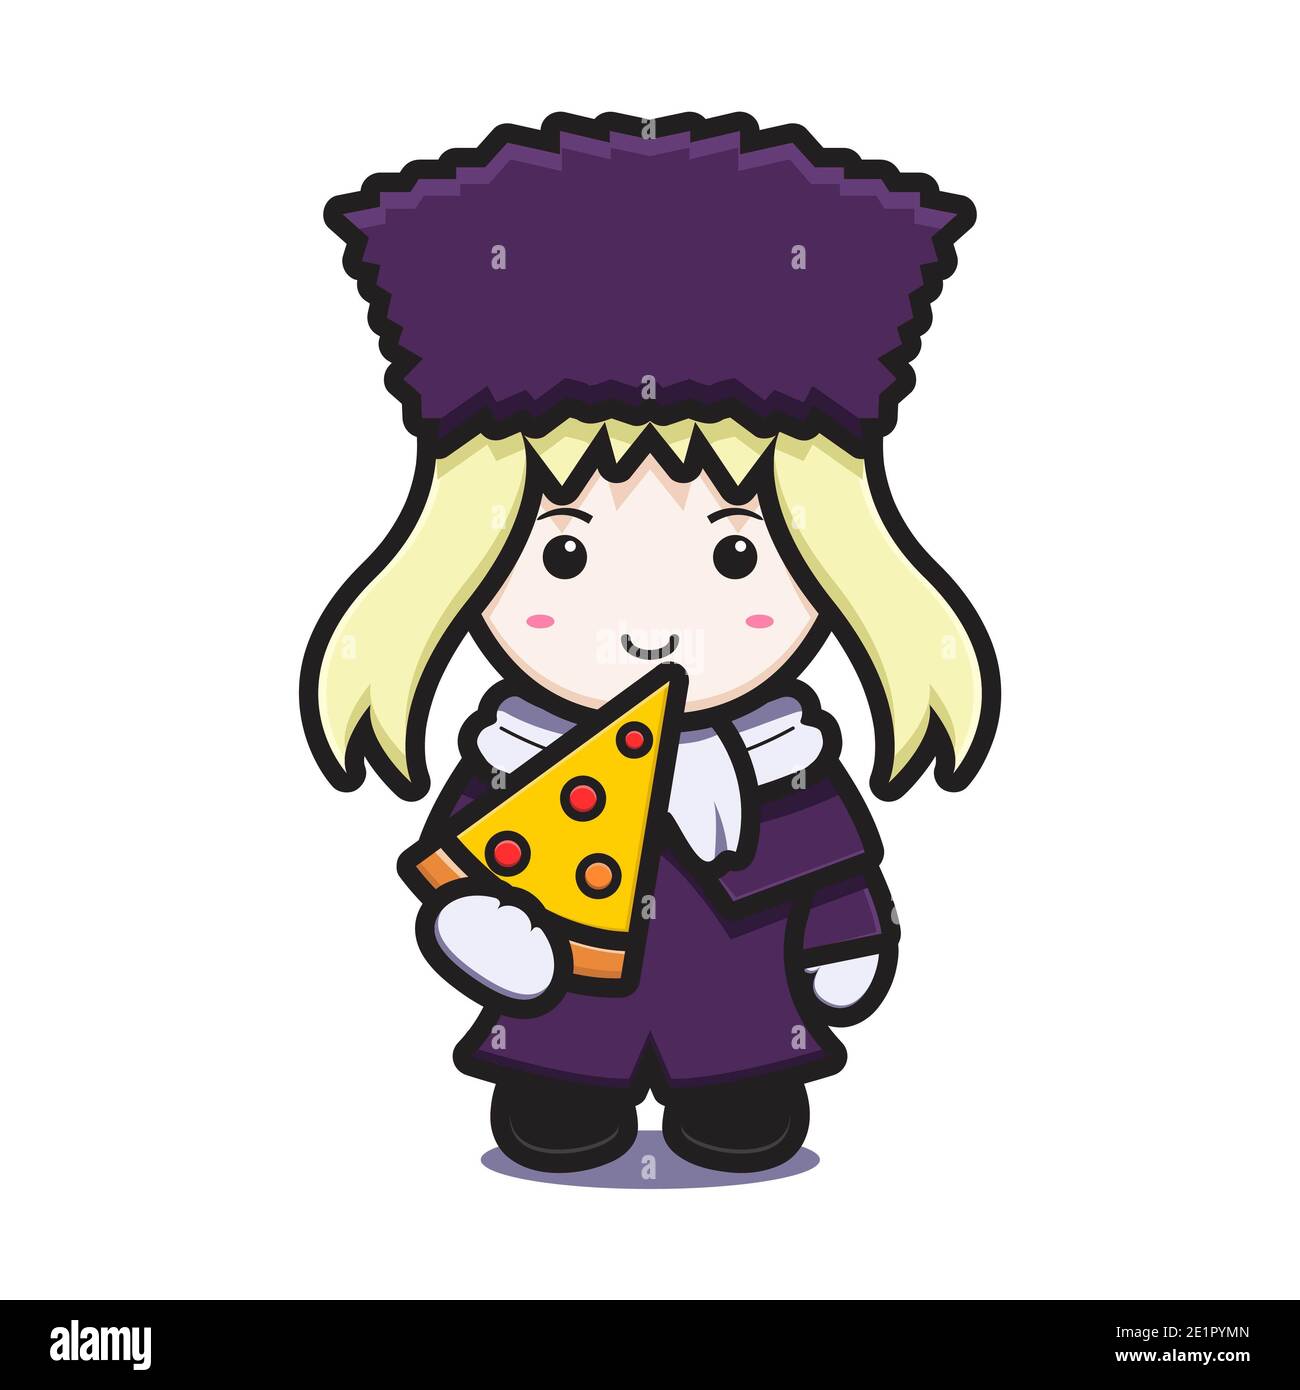 Cute girl with winter costume mascot character eat pizza vector cartoon icon illustration. Design isolated on white. Flat cartoon style. Stock Photo